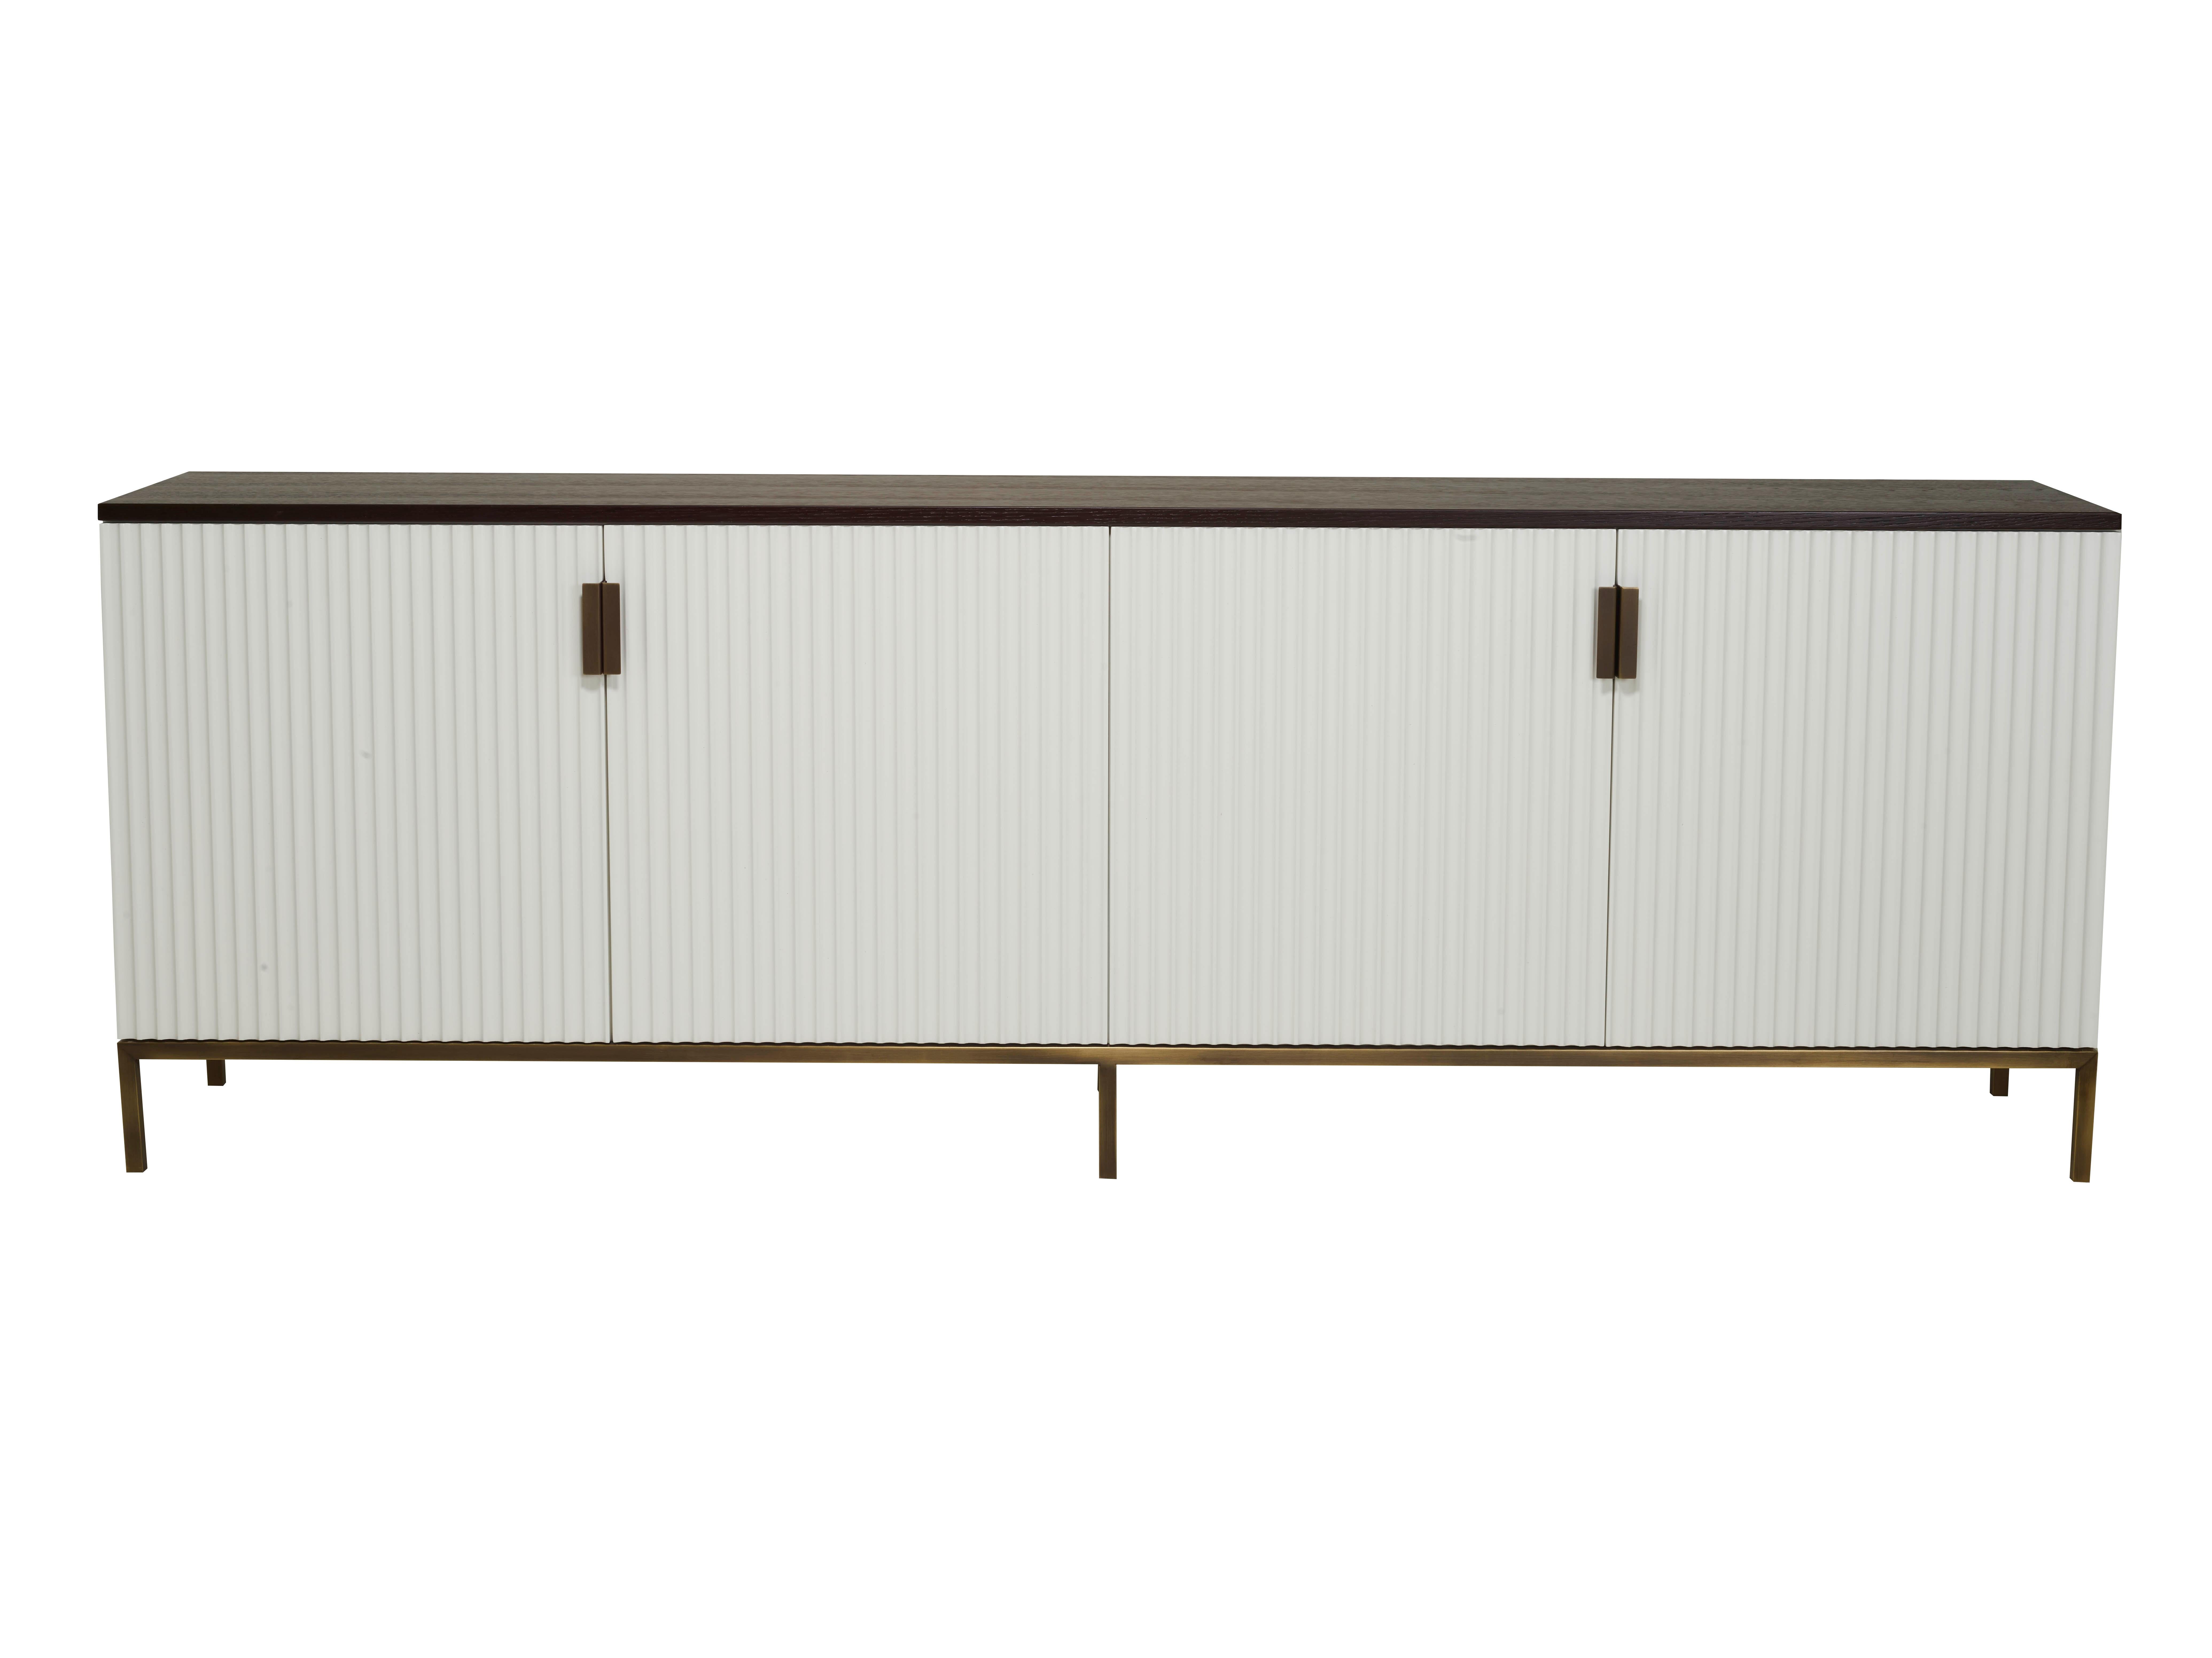 Sideboard by Gürkan Dogan
Dimensions: W 60 x D 180 x H 50 cm
Materials: Smoked Oak, Antique Brass, White Lacquer, Mirror.